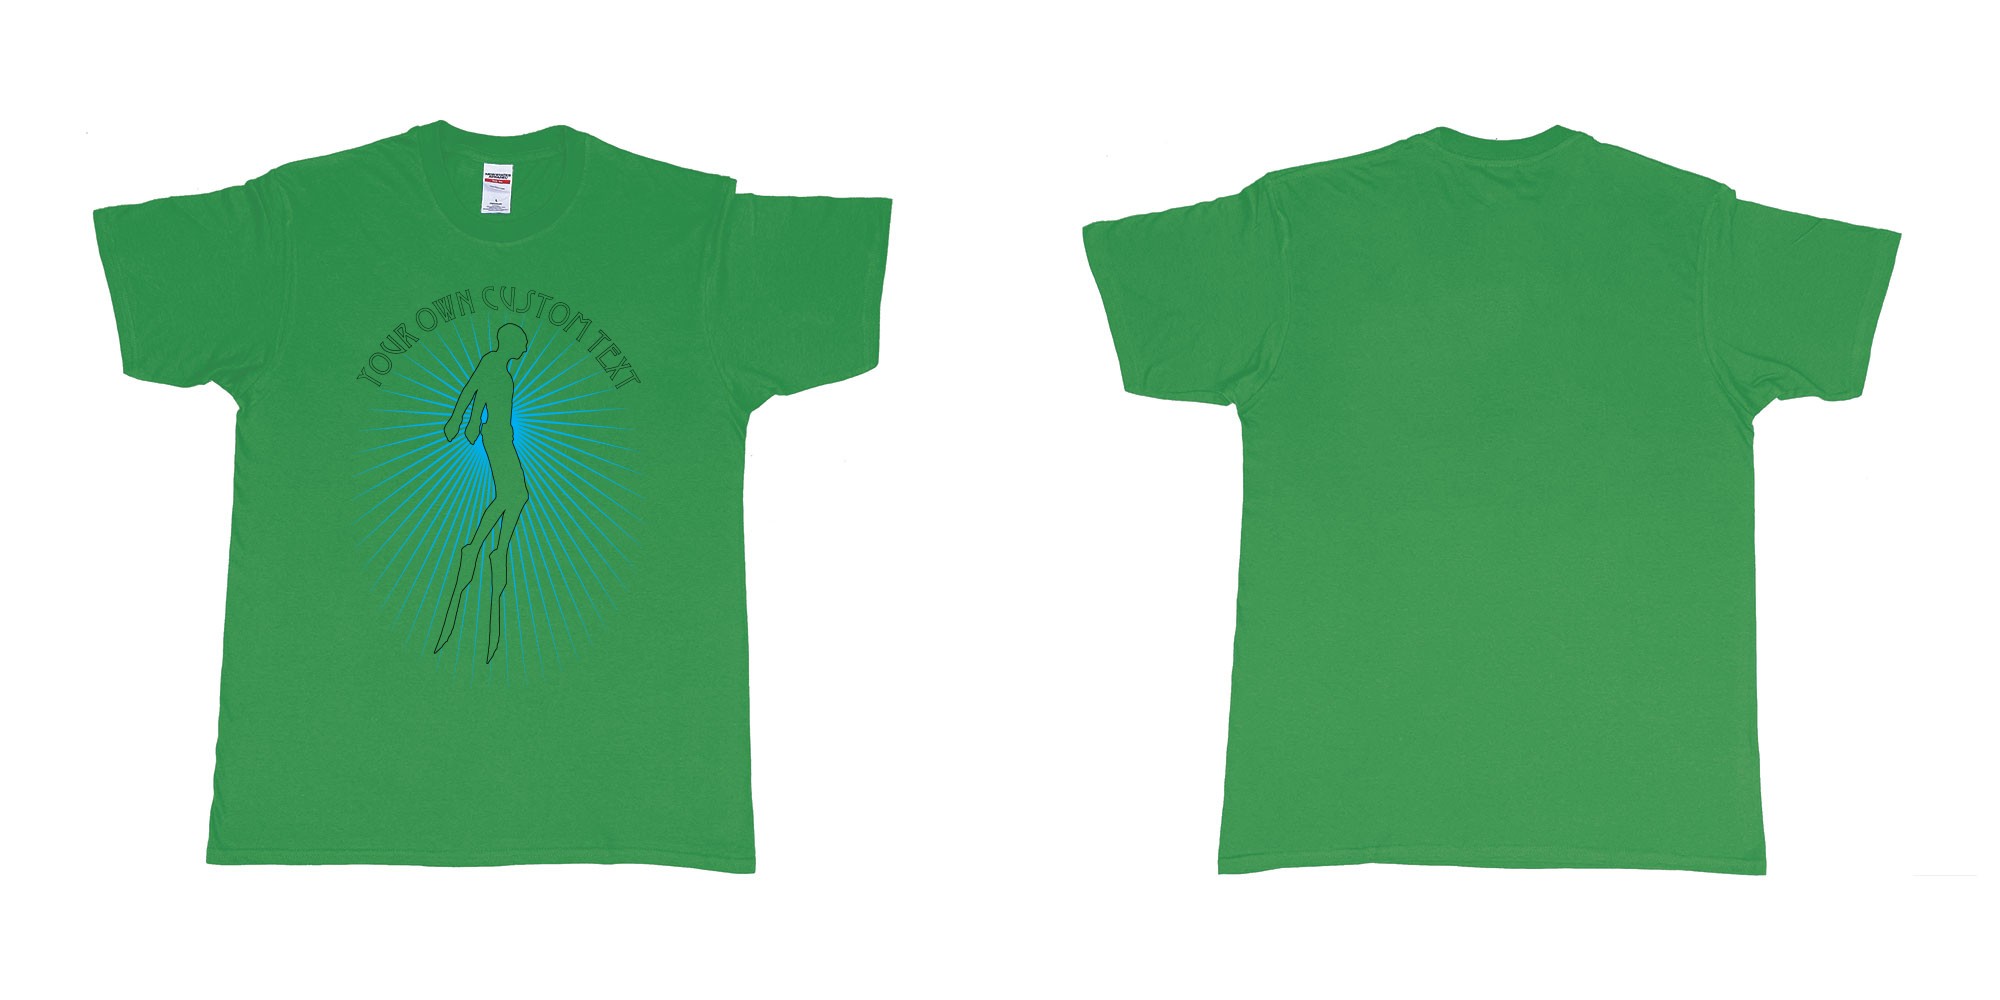 Custom tshirt design freediver swimming sun rays in fabric color irish-green choice your own text made in Bali by The Pirate Way